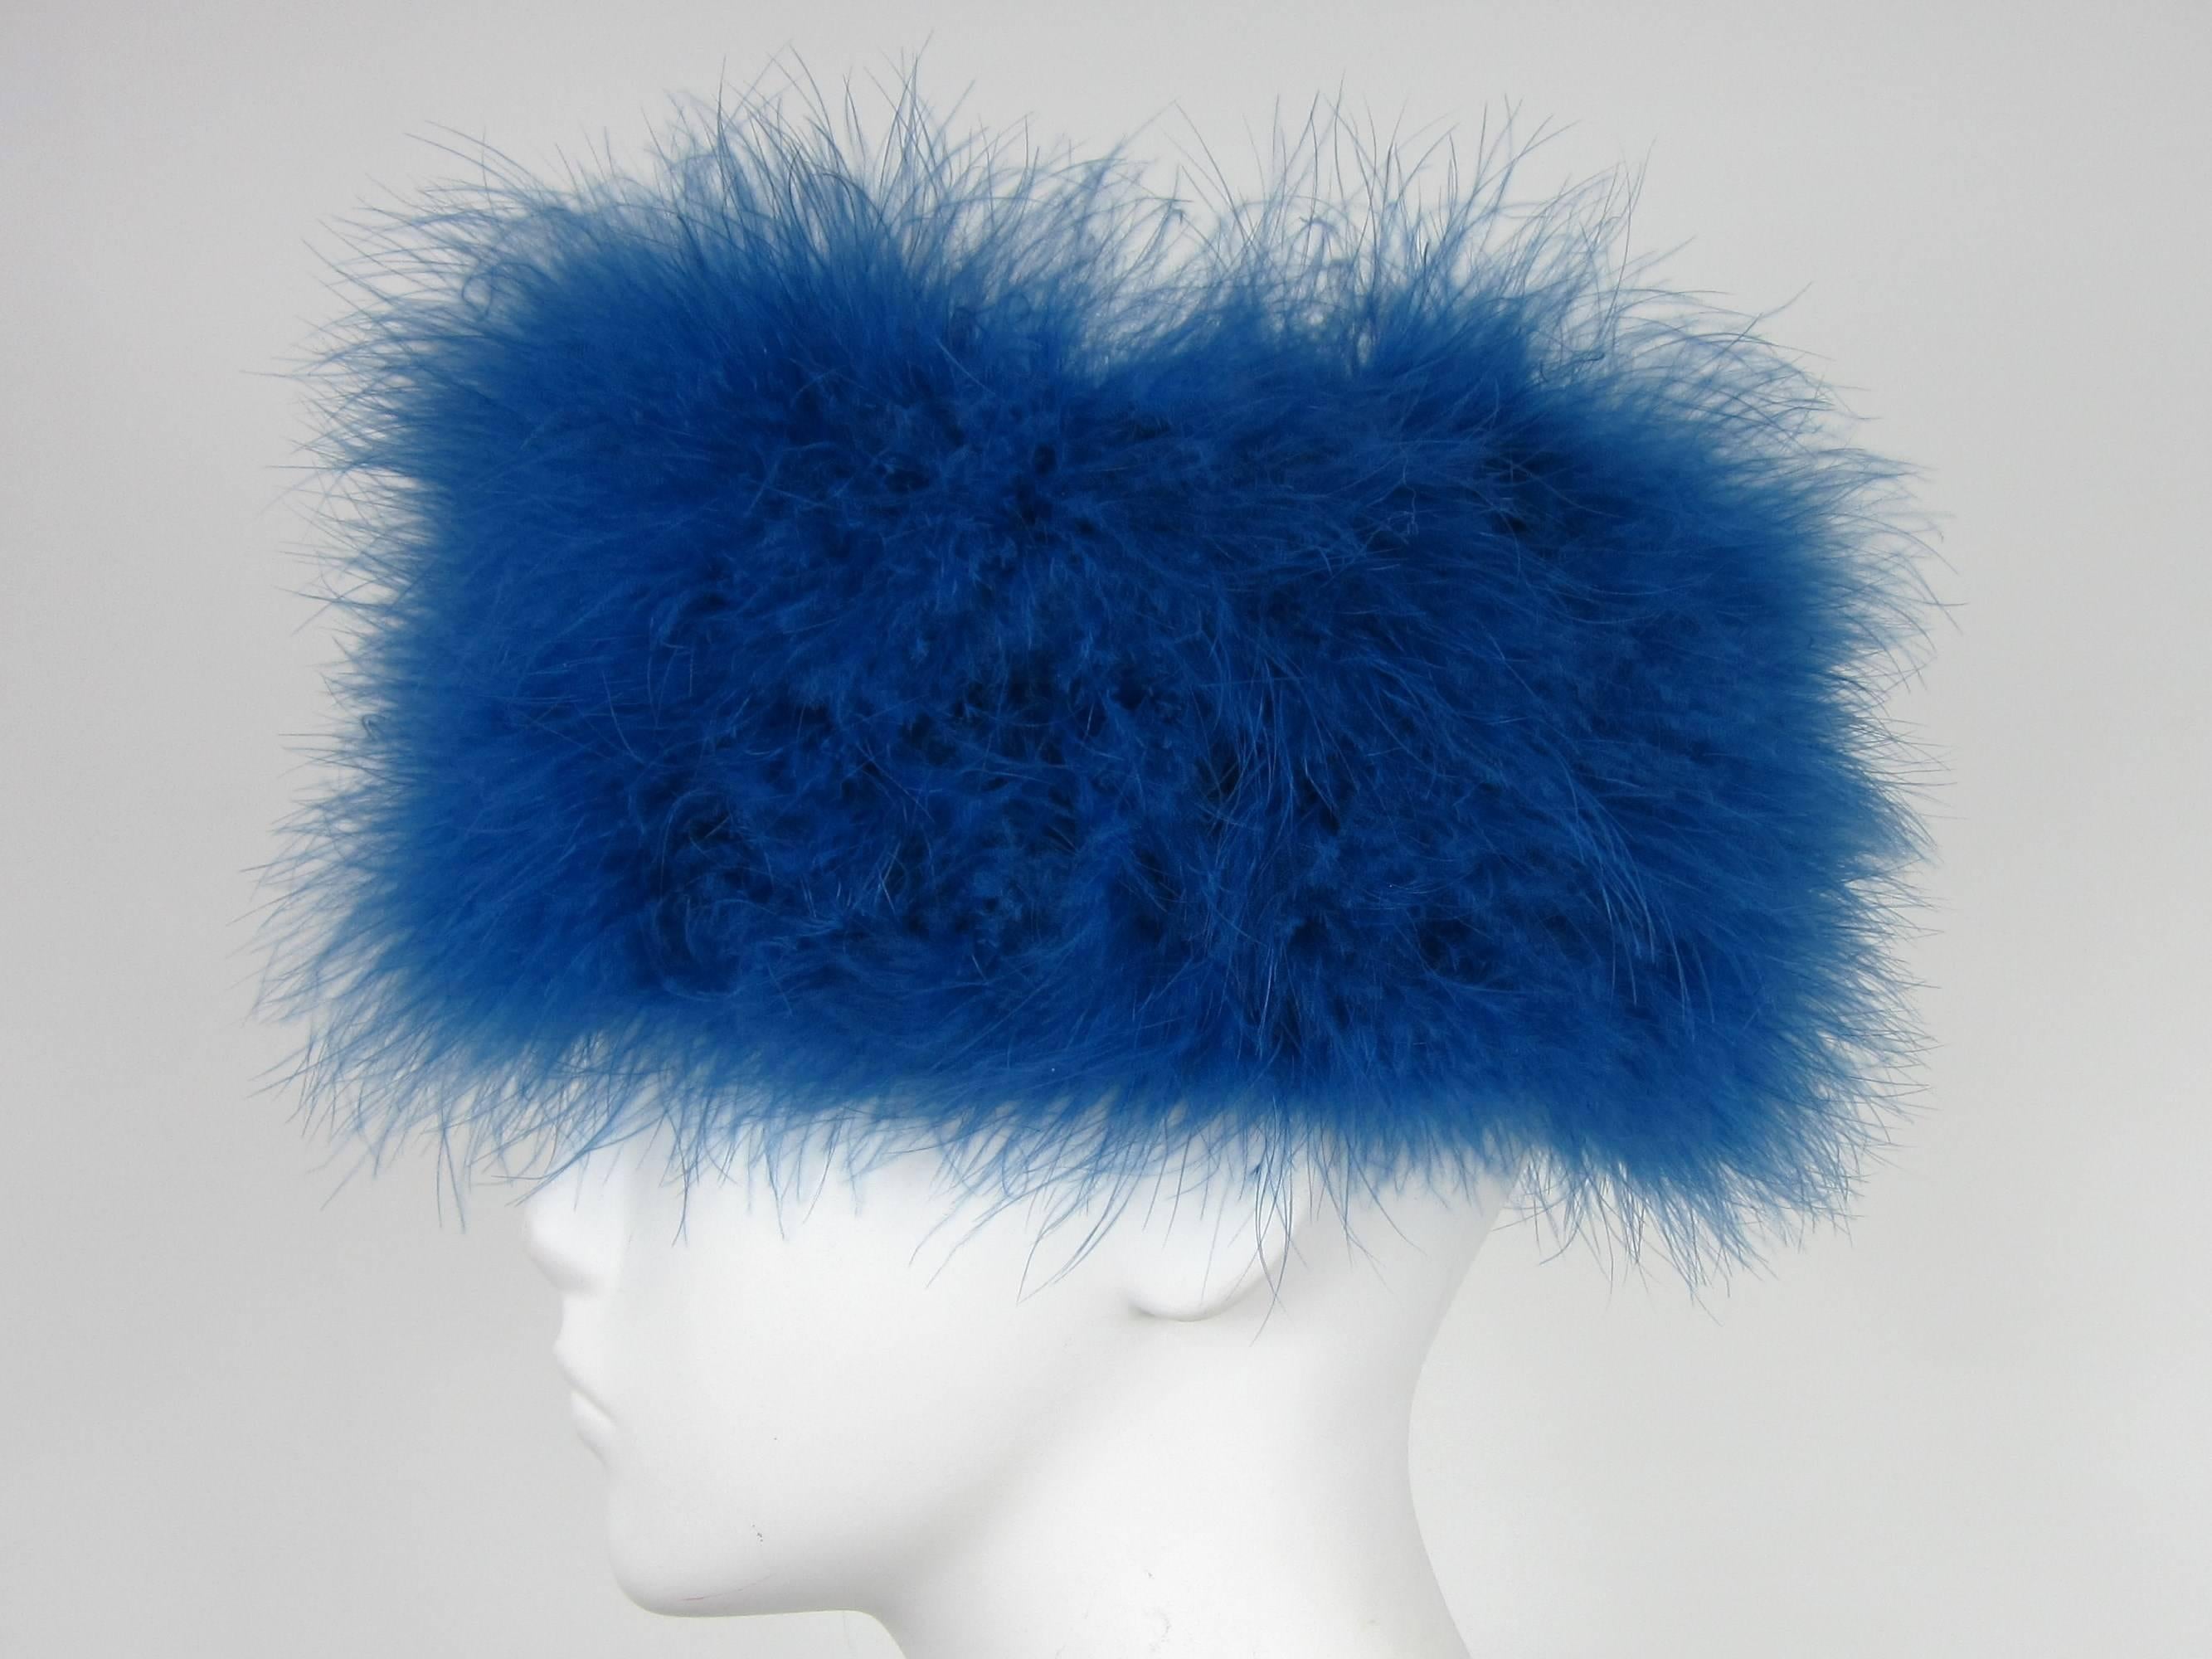 Deep Blue Givenchy Feathered Hat Measuring 22 inside Circumference. Approx a size 7  - 4.5  High. Be sure to check our storefront for more fabulous pieces from this collection. We have been selling this collection on 1st dibs since 2013. You can